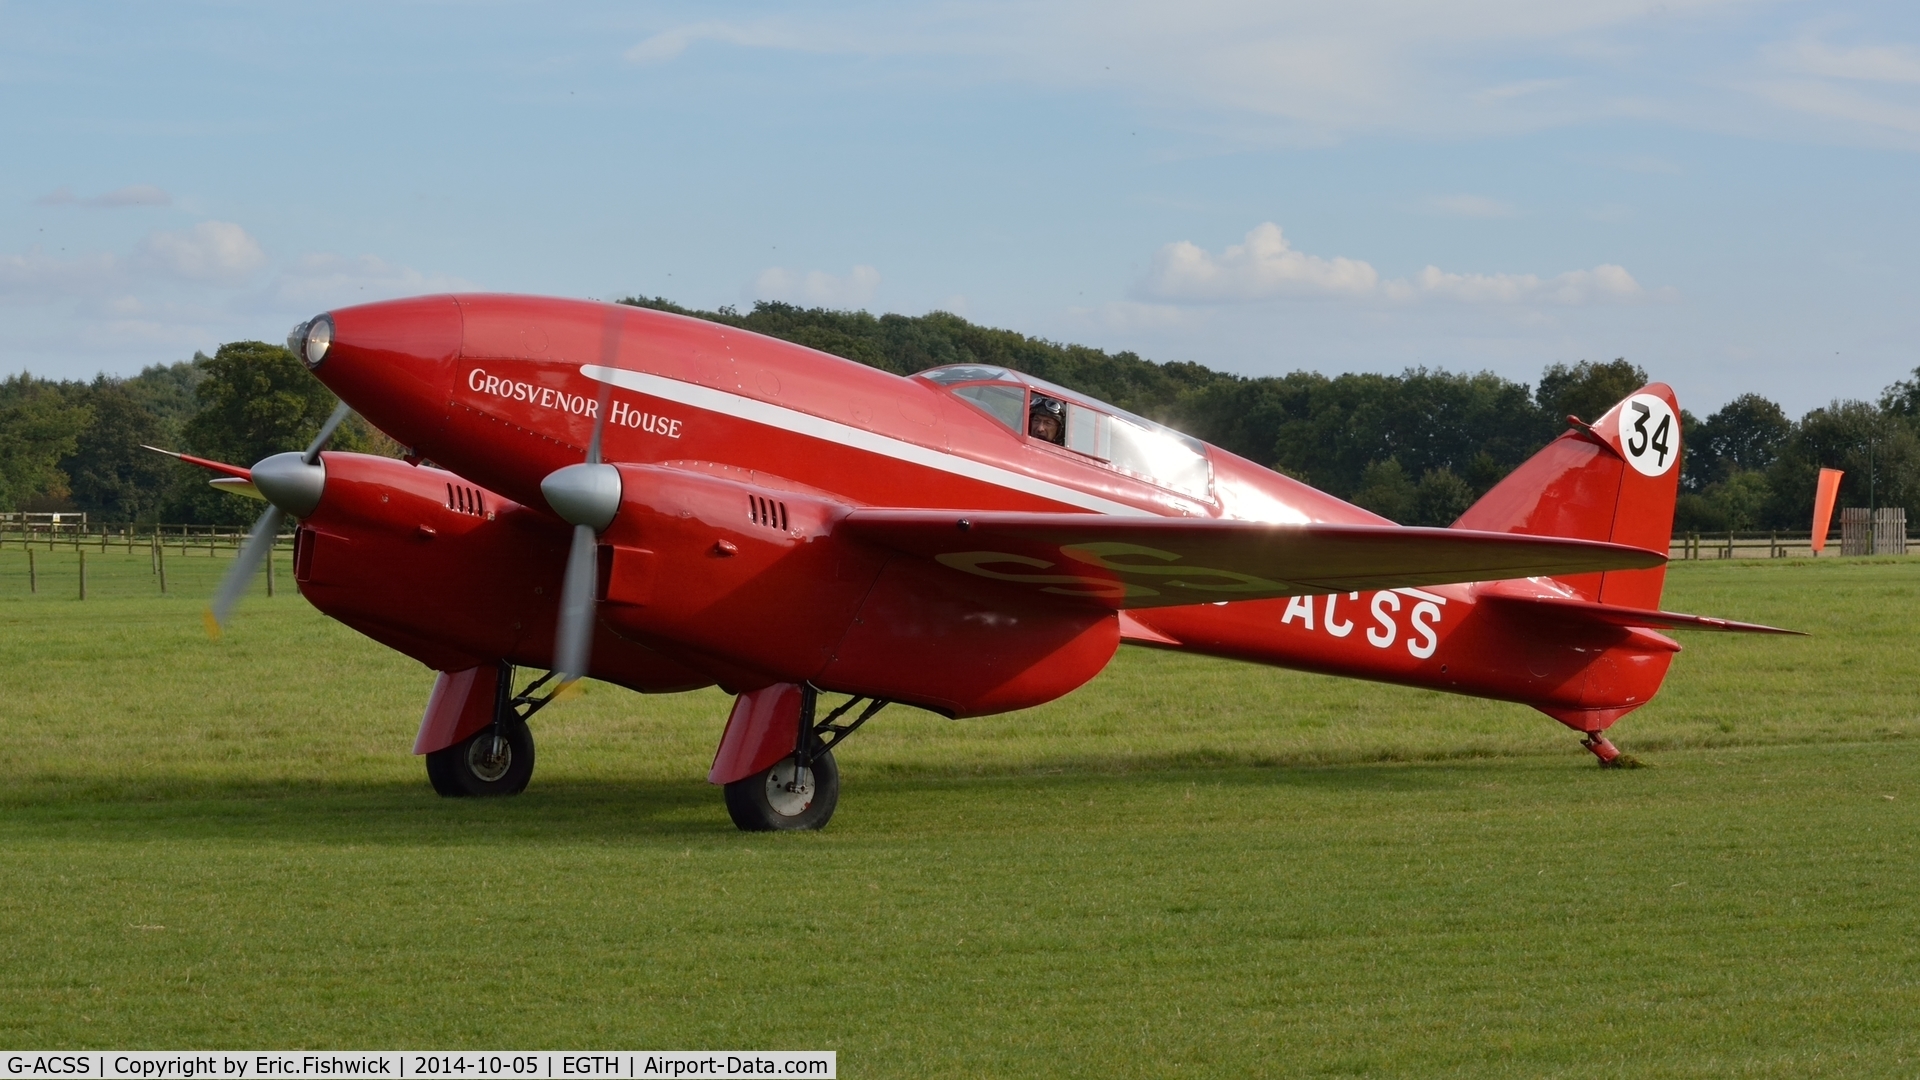 G-ACSS, 1934 De Havilland DH-88 Comet C/N 1996, 1. G-ACSS returning from an exhilarating display at the rousing season finale Race Day Air Show at Shuttleworth, Oct. 2014.